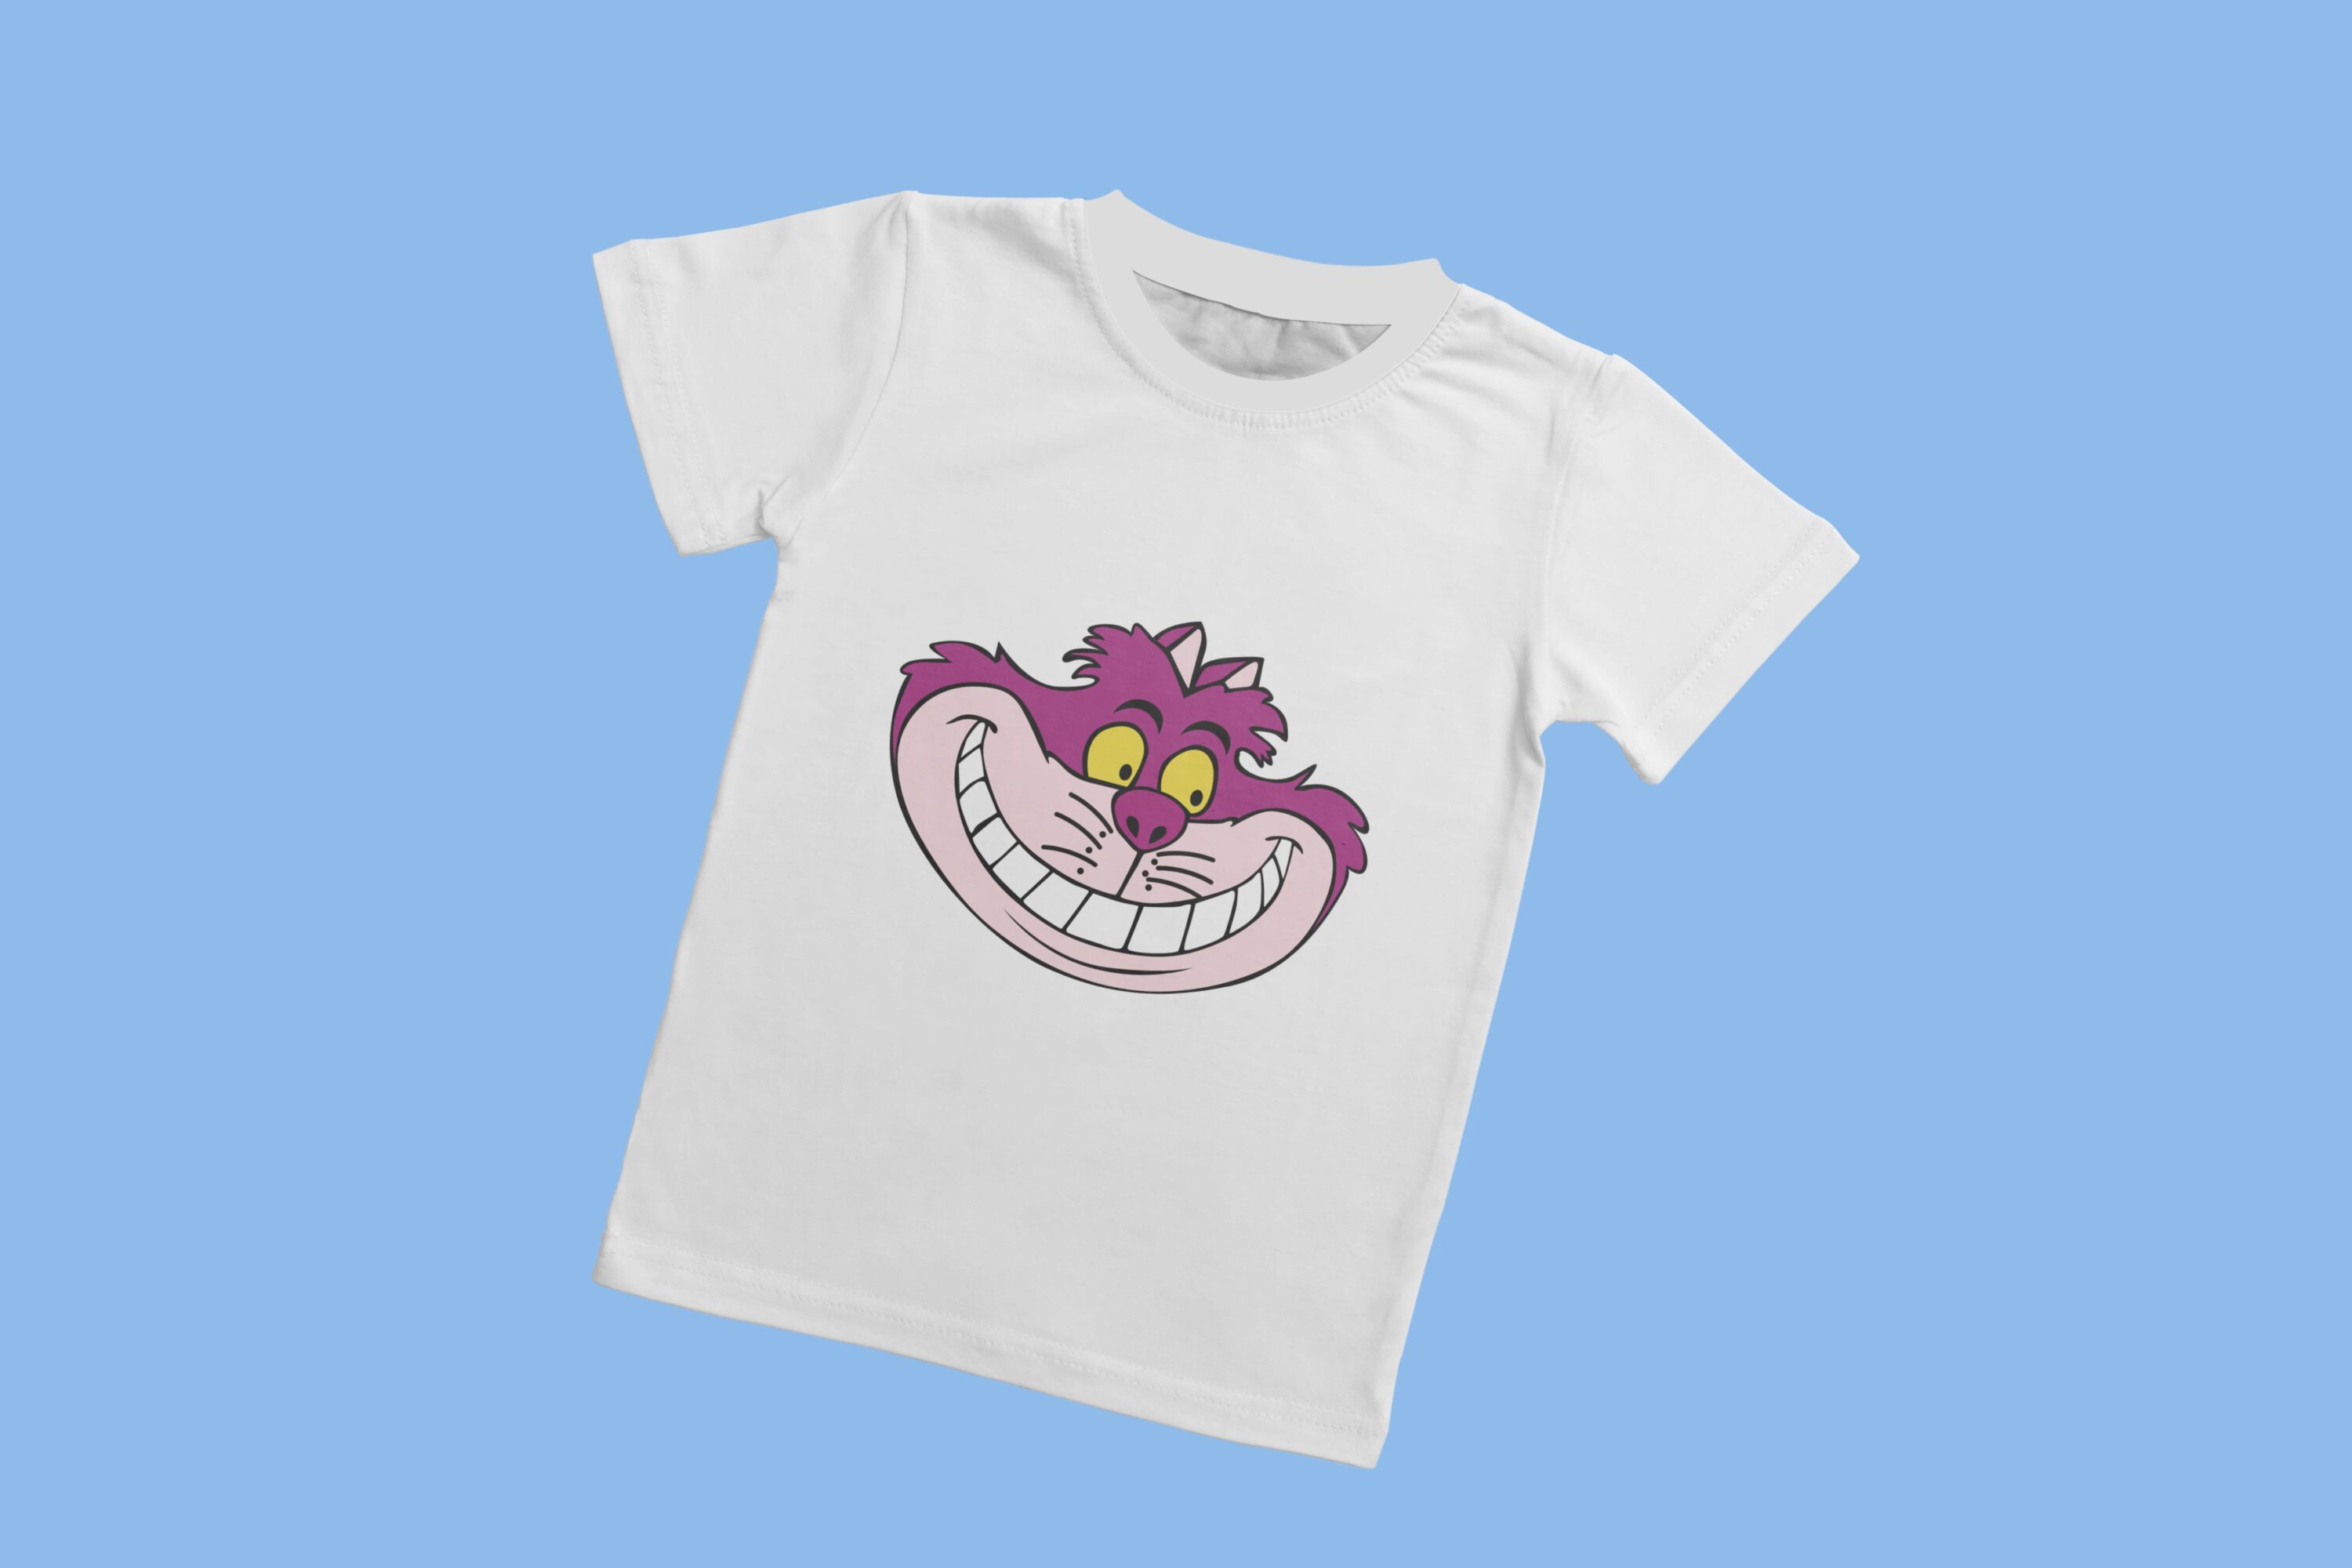 A white T-shirt with a white collar and the face of a Cheshire cat looking to the right, on a blue background.